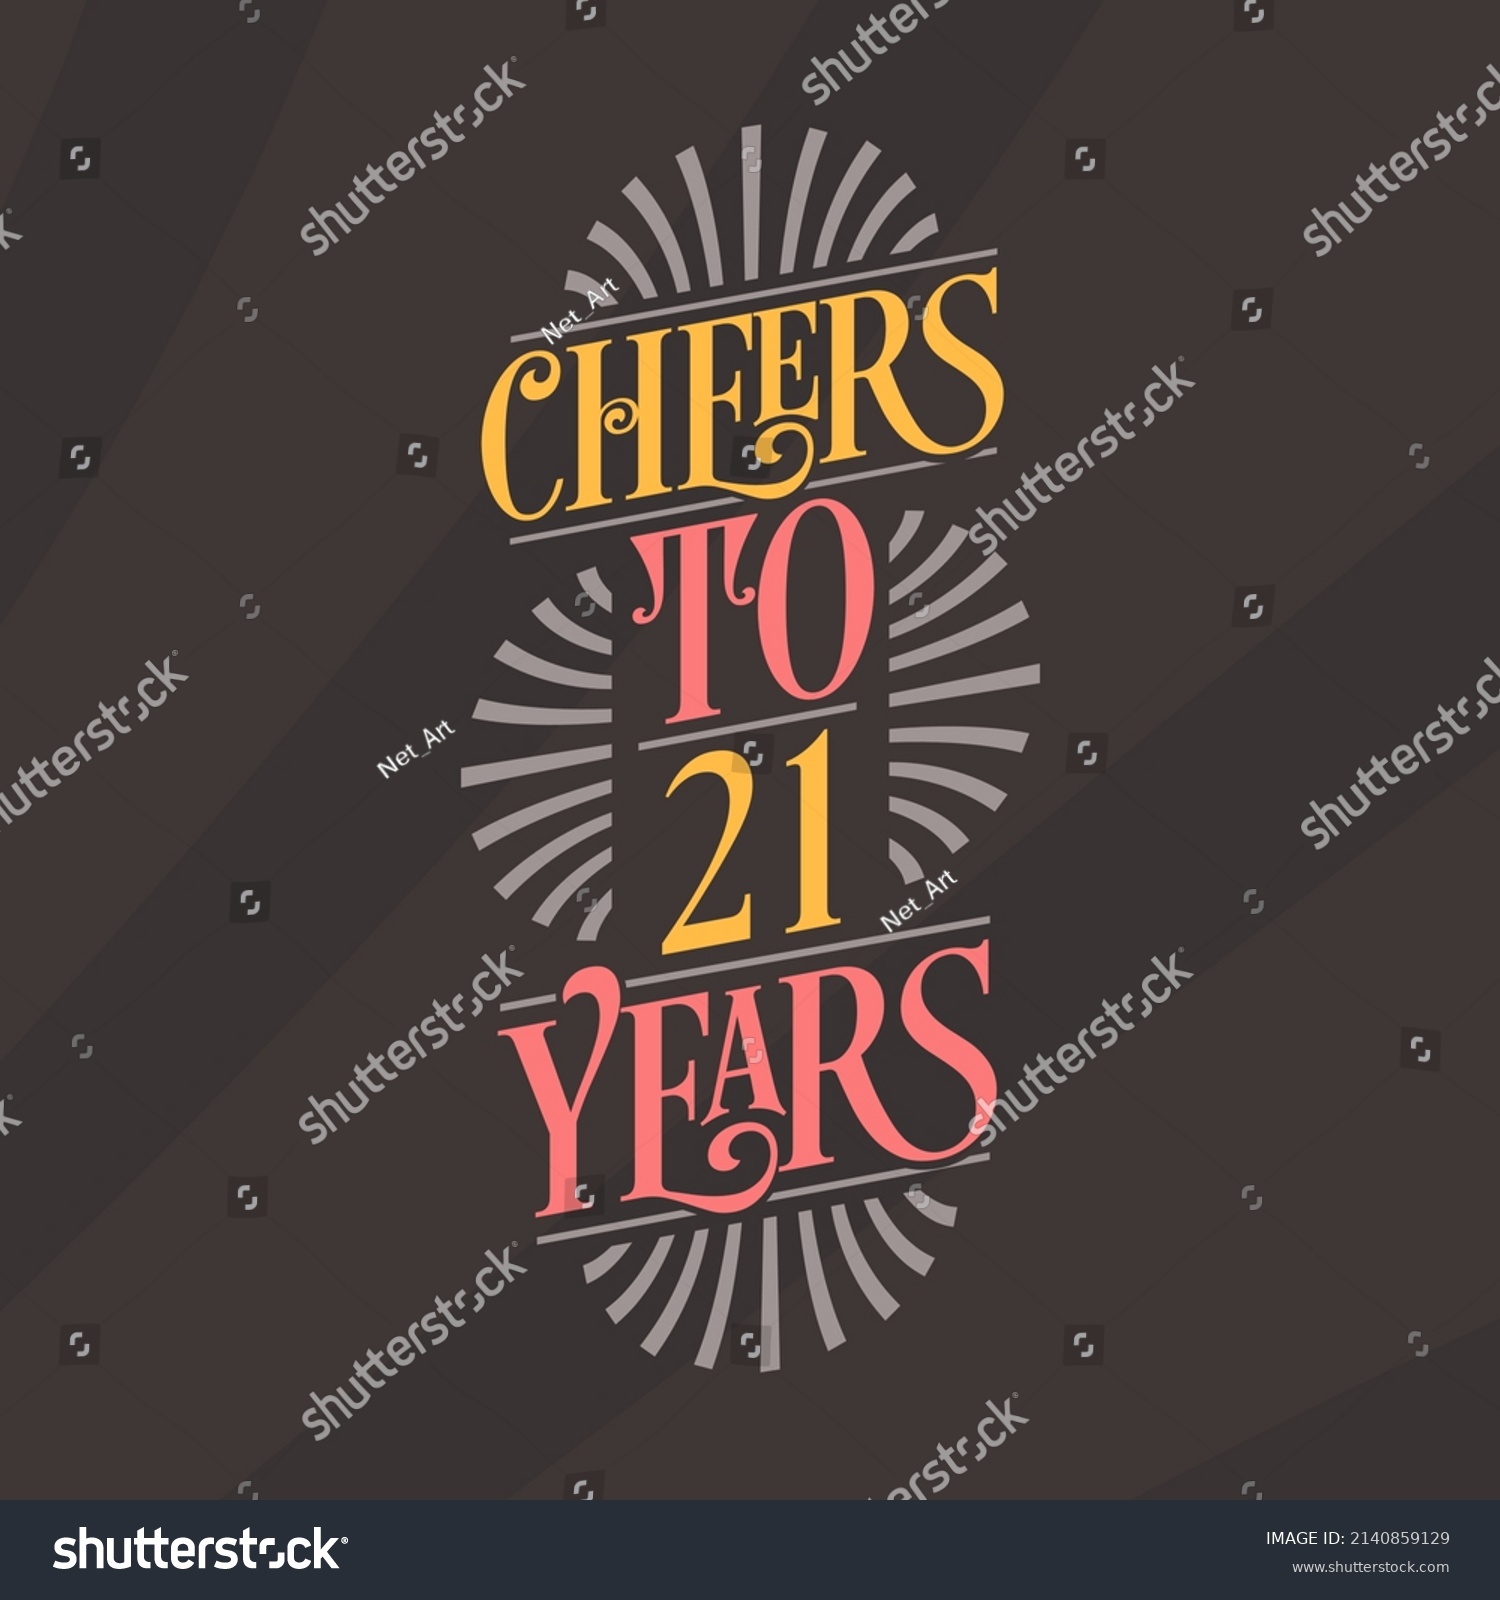 SVG of Cheers to 21 years, 21st birthday celebration svg